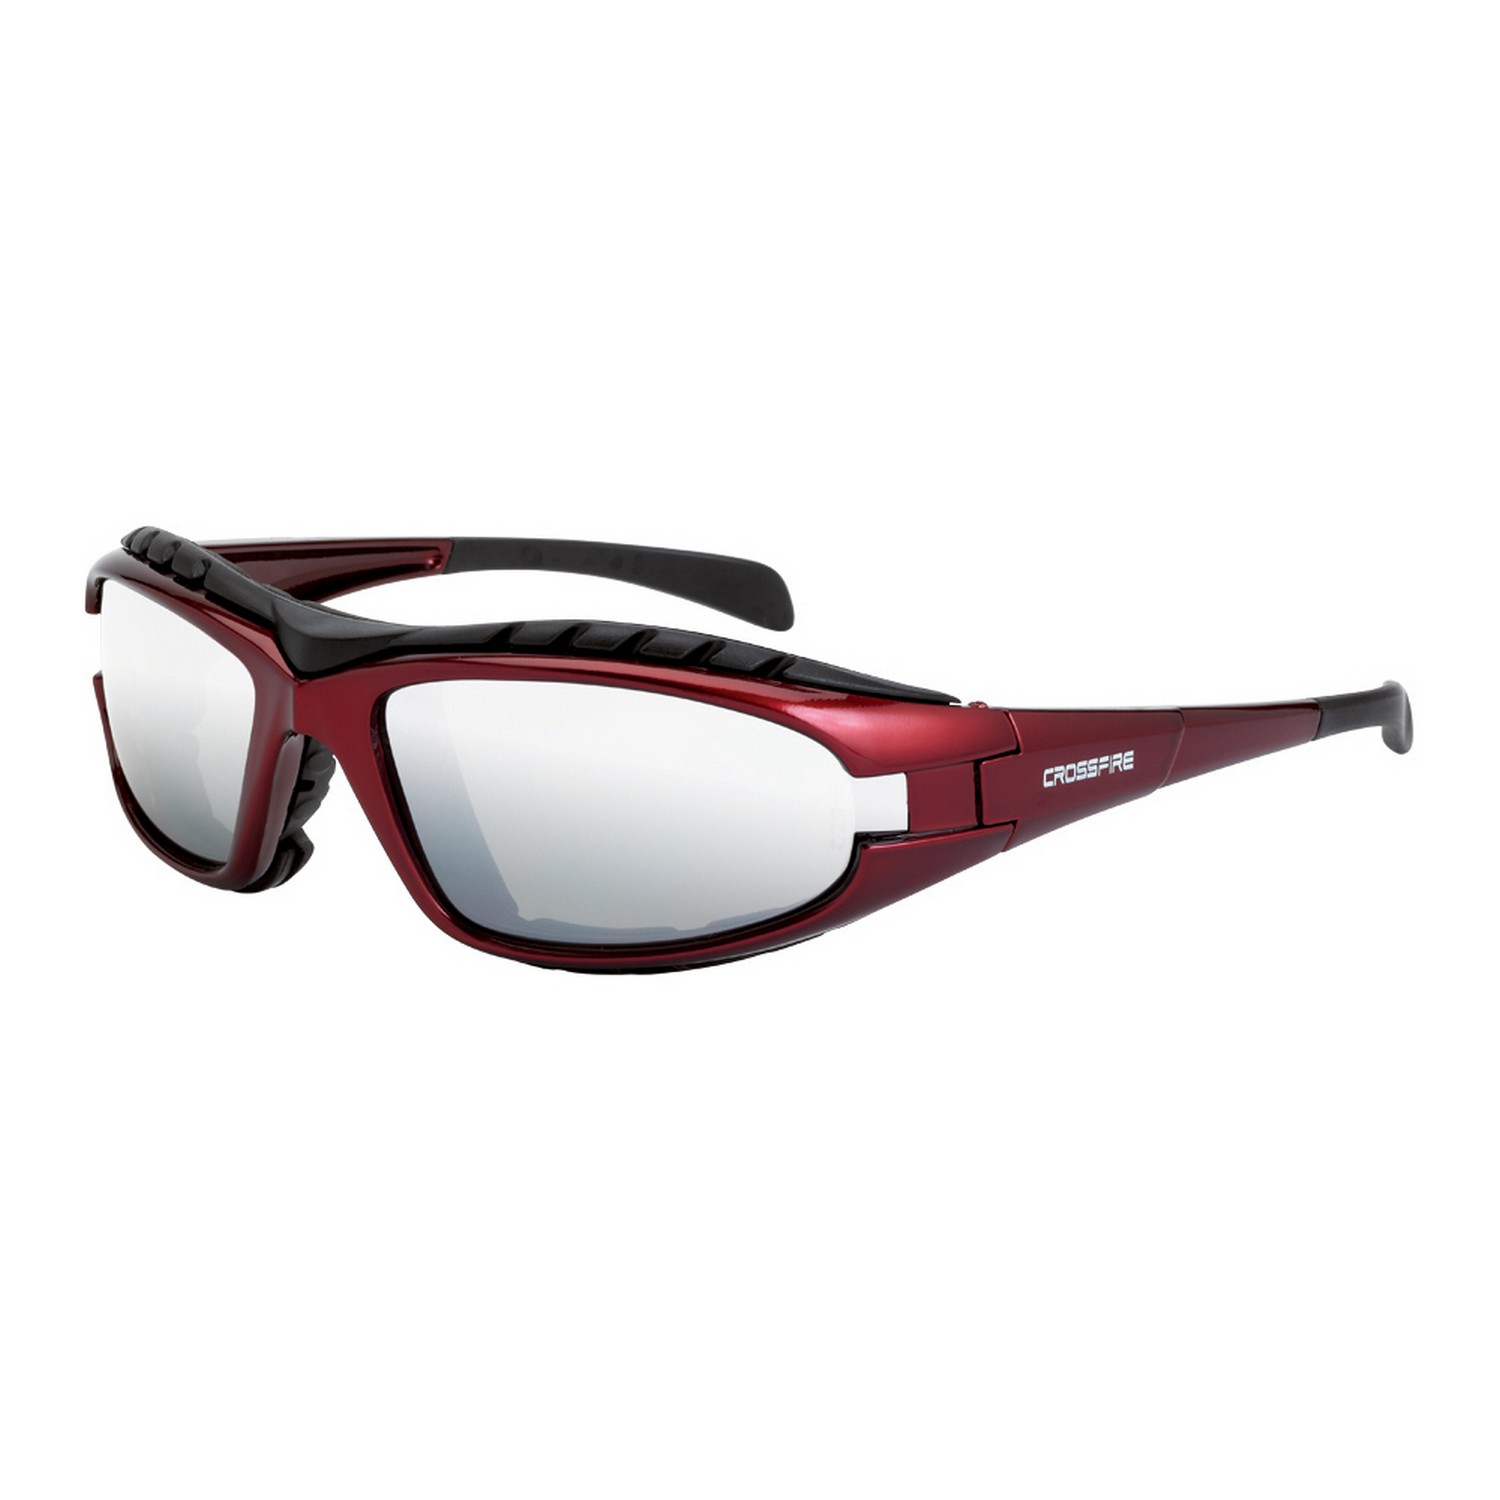 Crossfire RPG Safety Glasses Sunglasses Red Frame Silver Mirror Lens 23233  Z87 for sale online